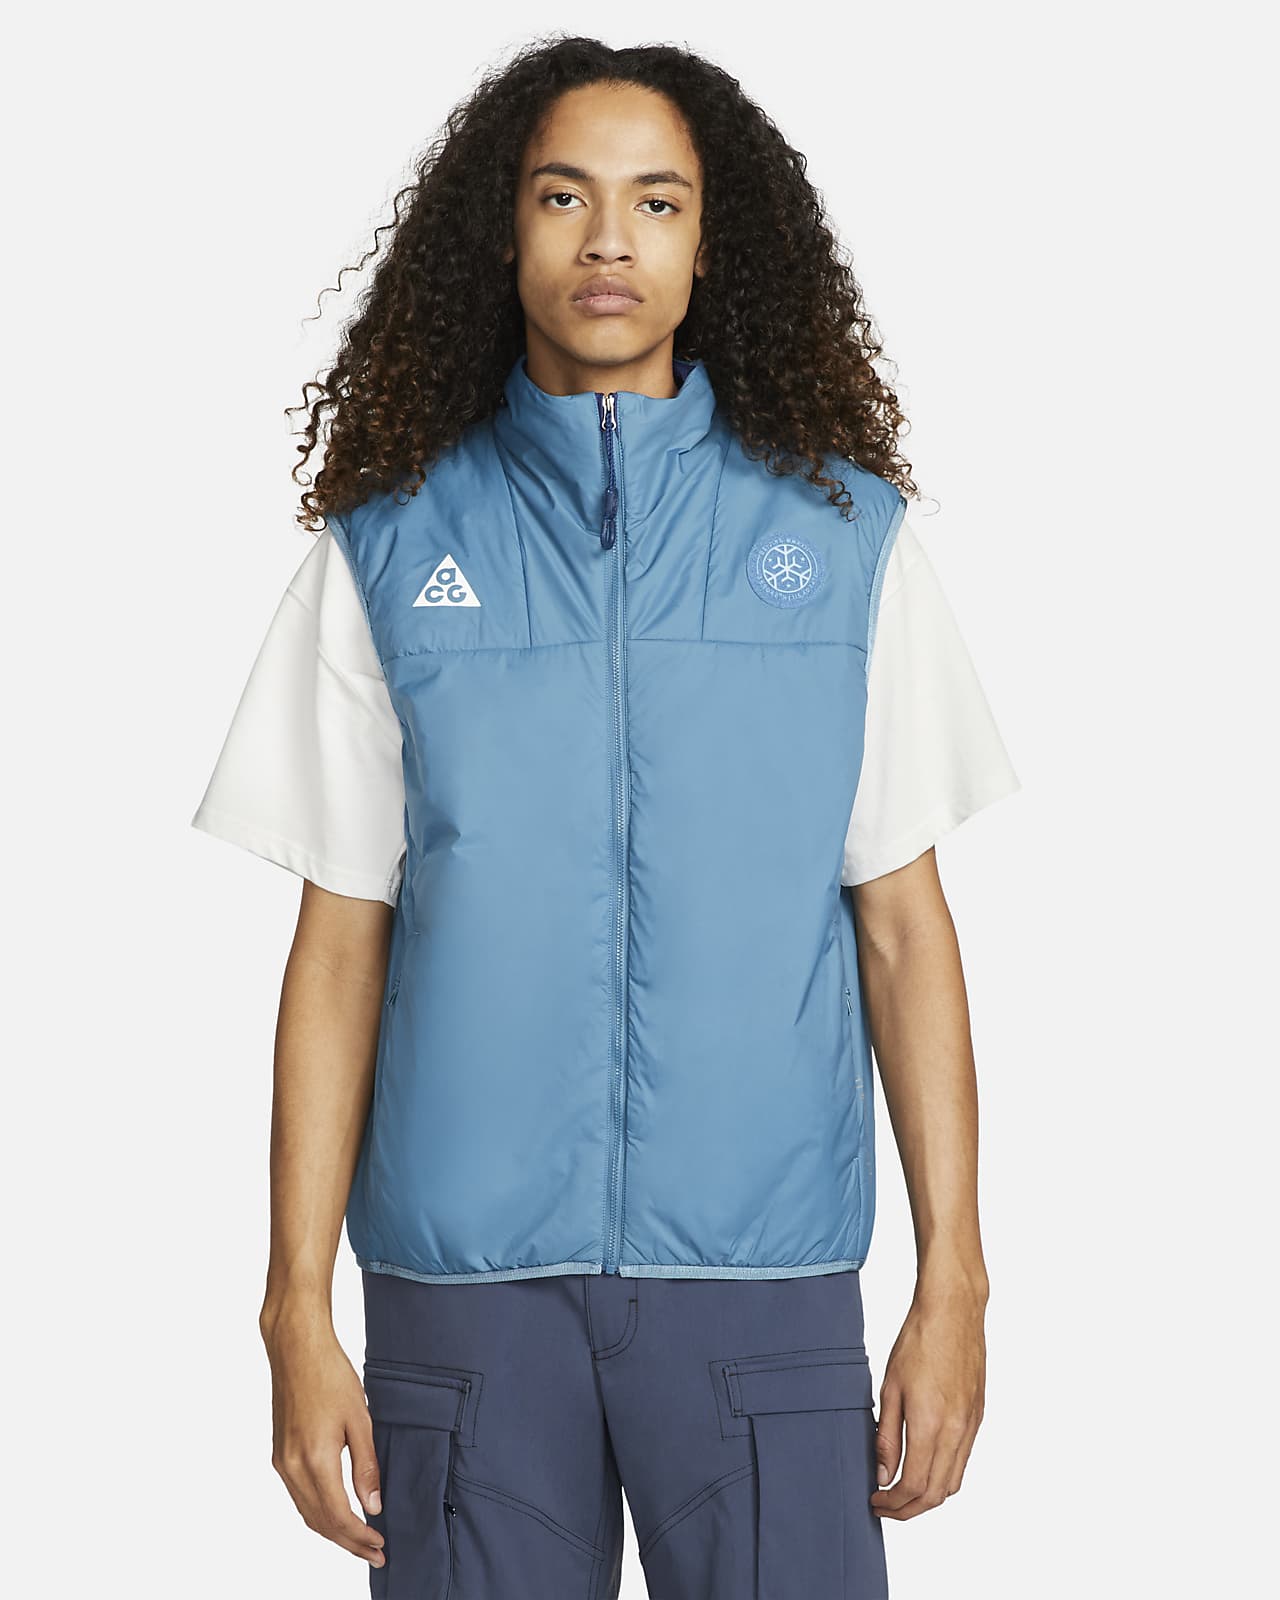 Nike Therma-FIT ACG "Rope De Dope" Packable Insulated Vest